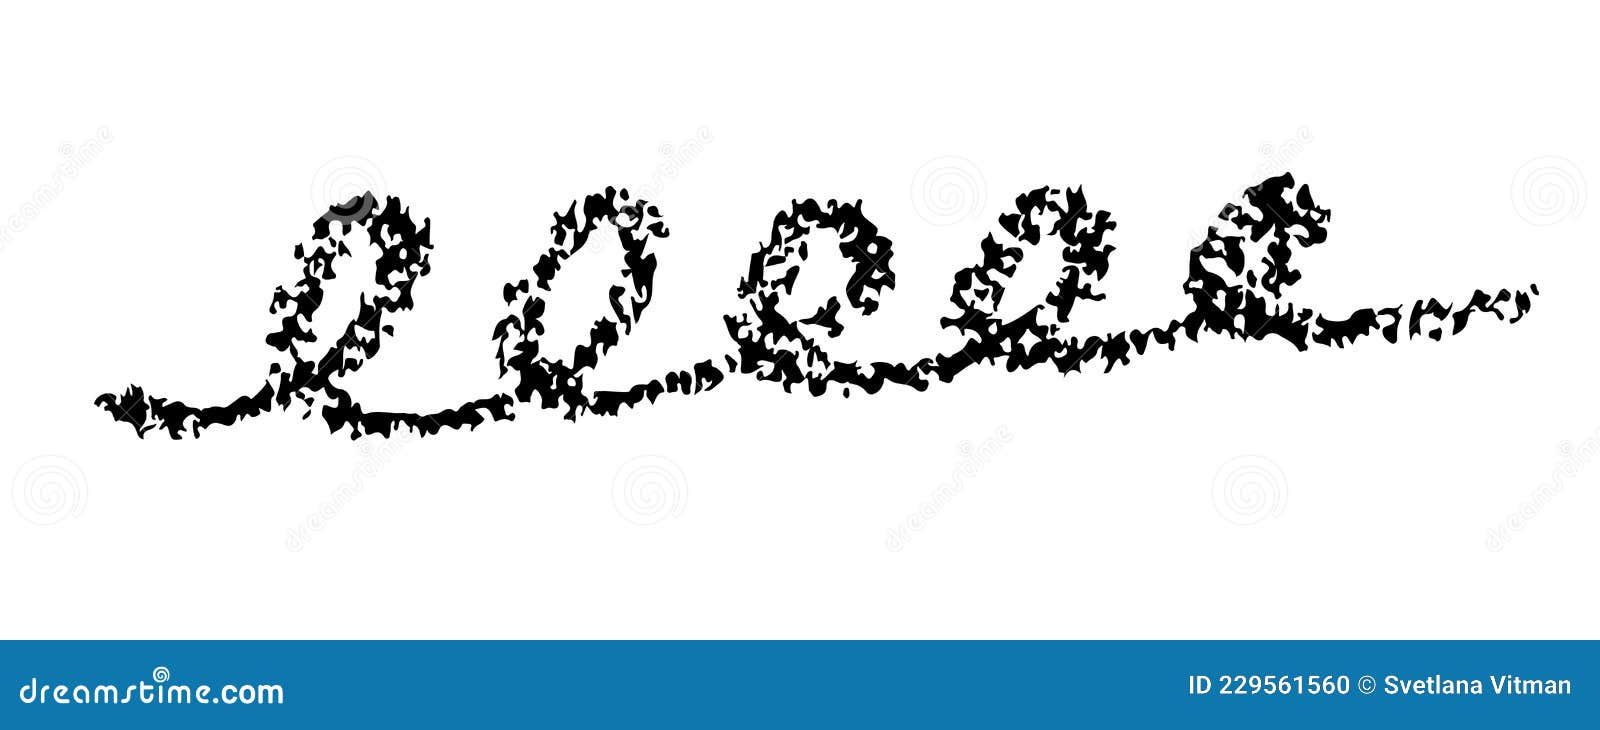 handwritting  abstract grunge brush hand drawn texture in black color sketch simple pattern  on white